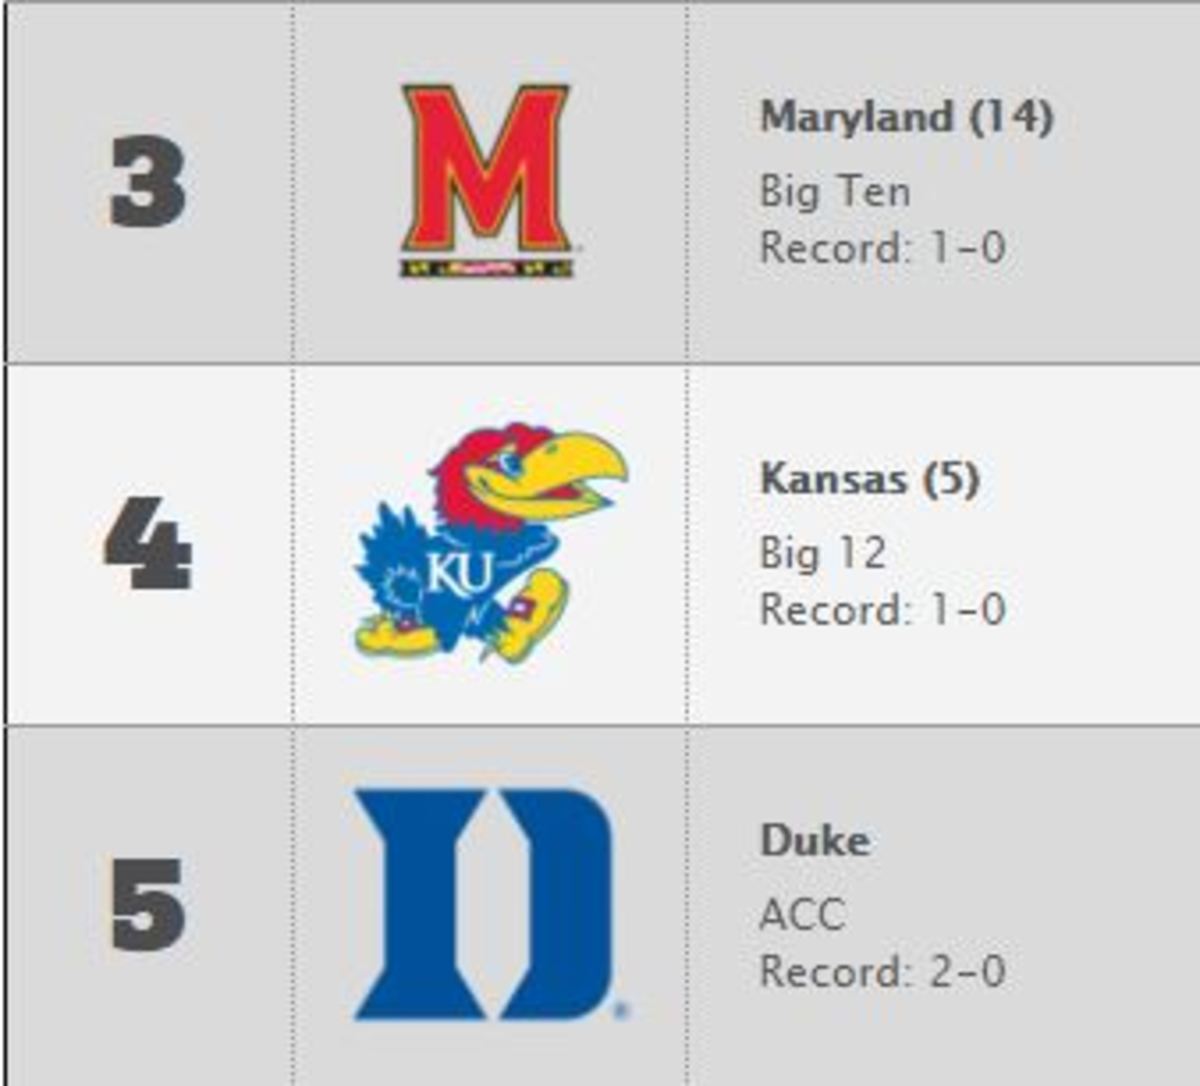 College basketball poll after week 3 of the 2015 season.